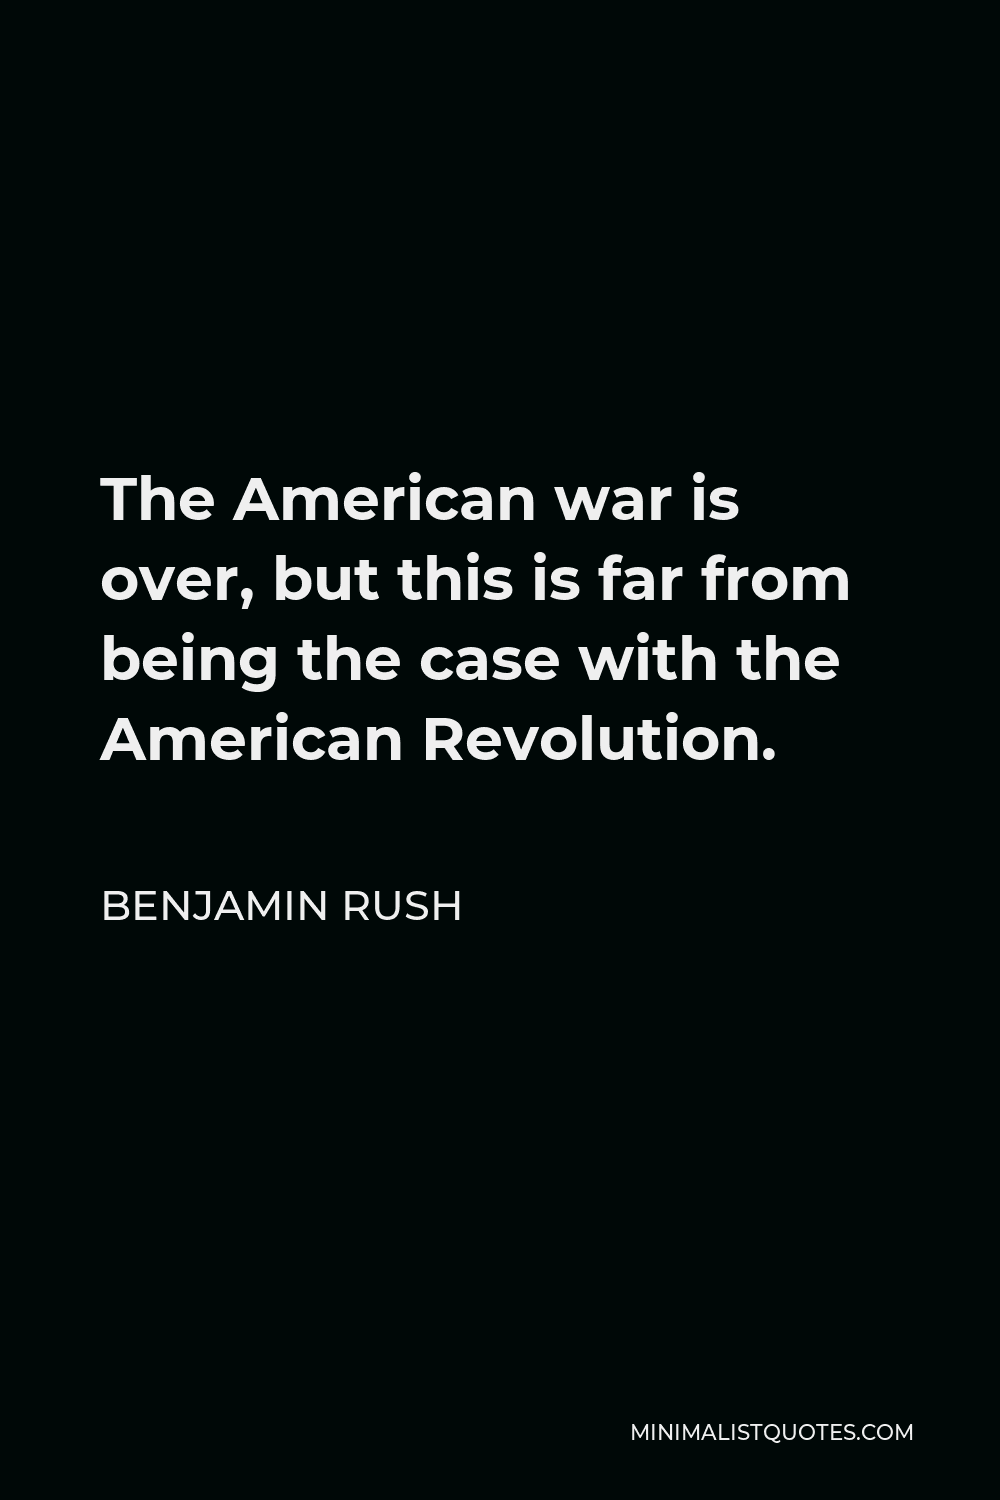 Benjamin Rush Quote - The American war is over, but this is far from being the case with the American Revolution.